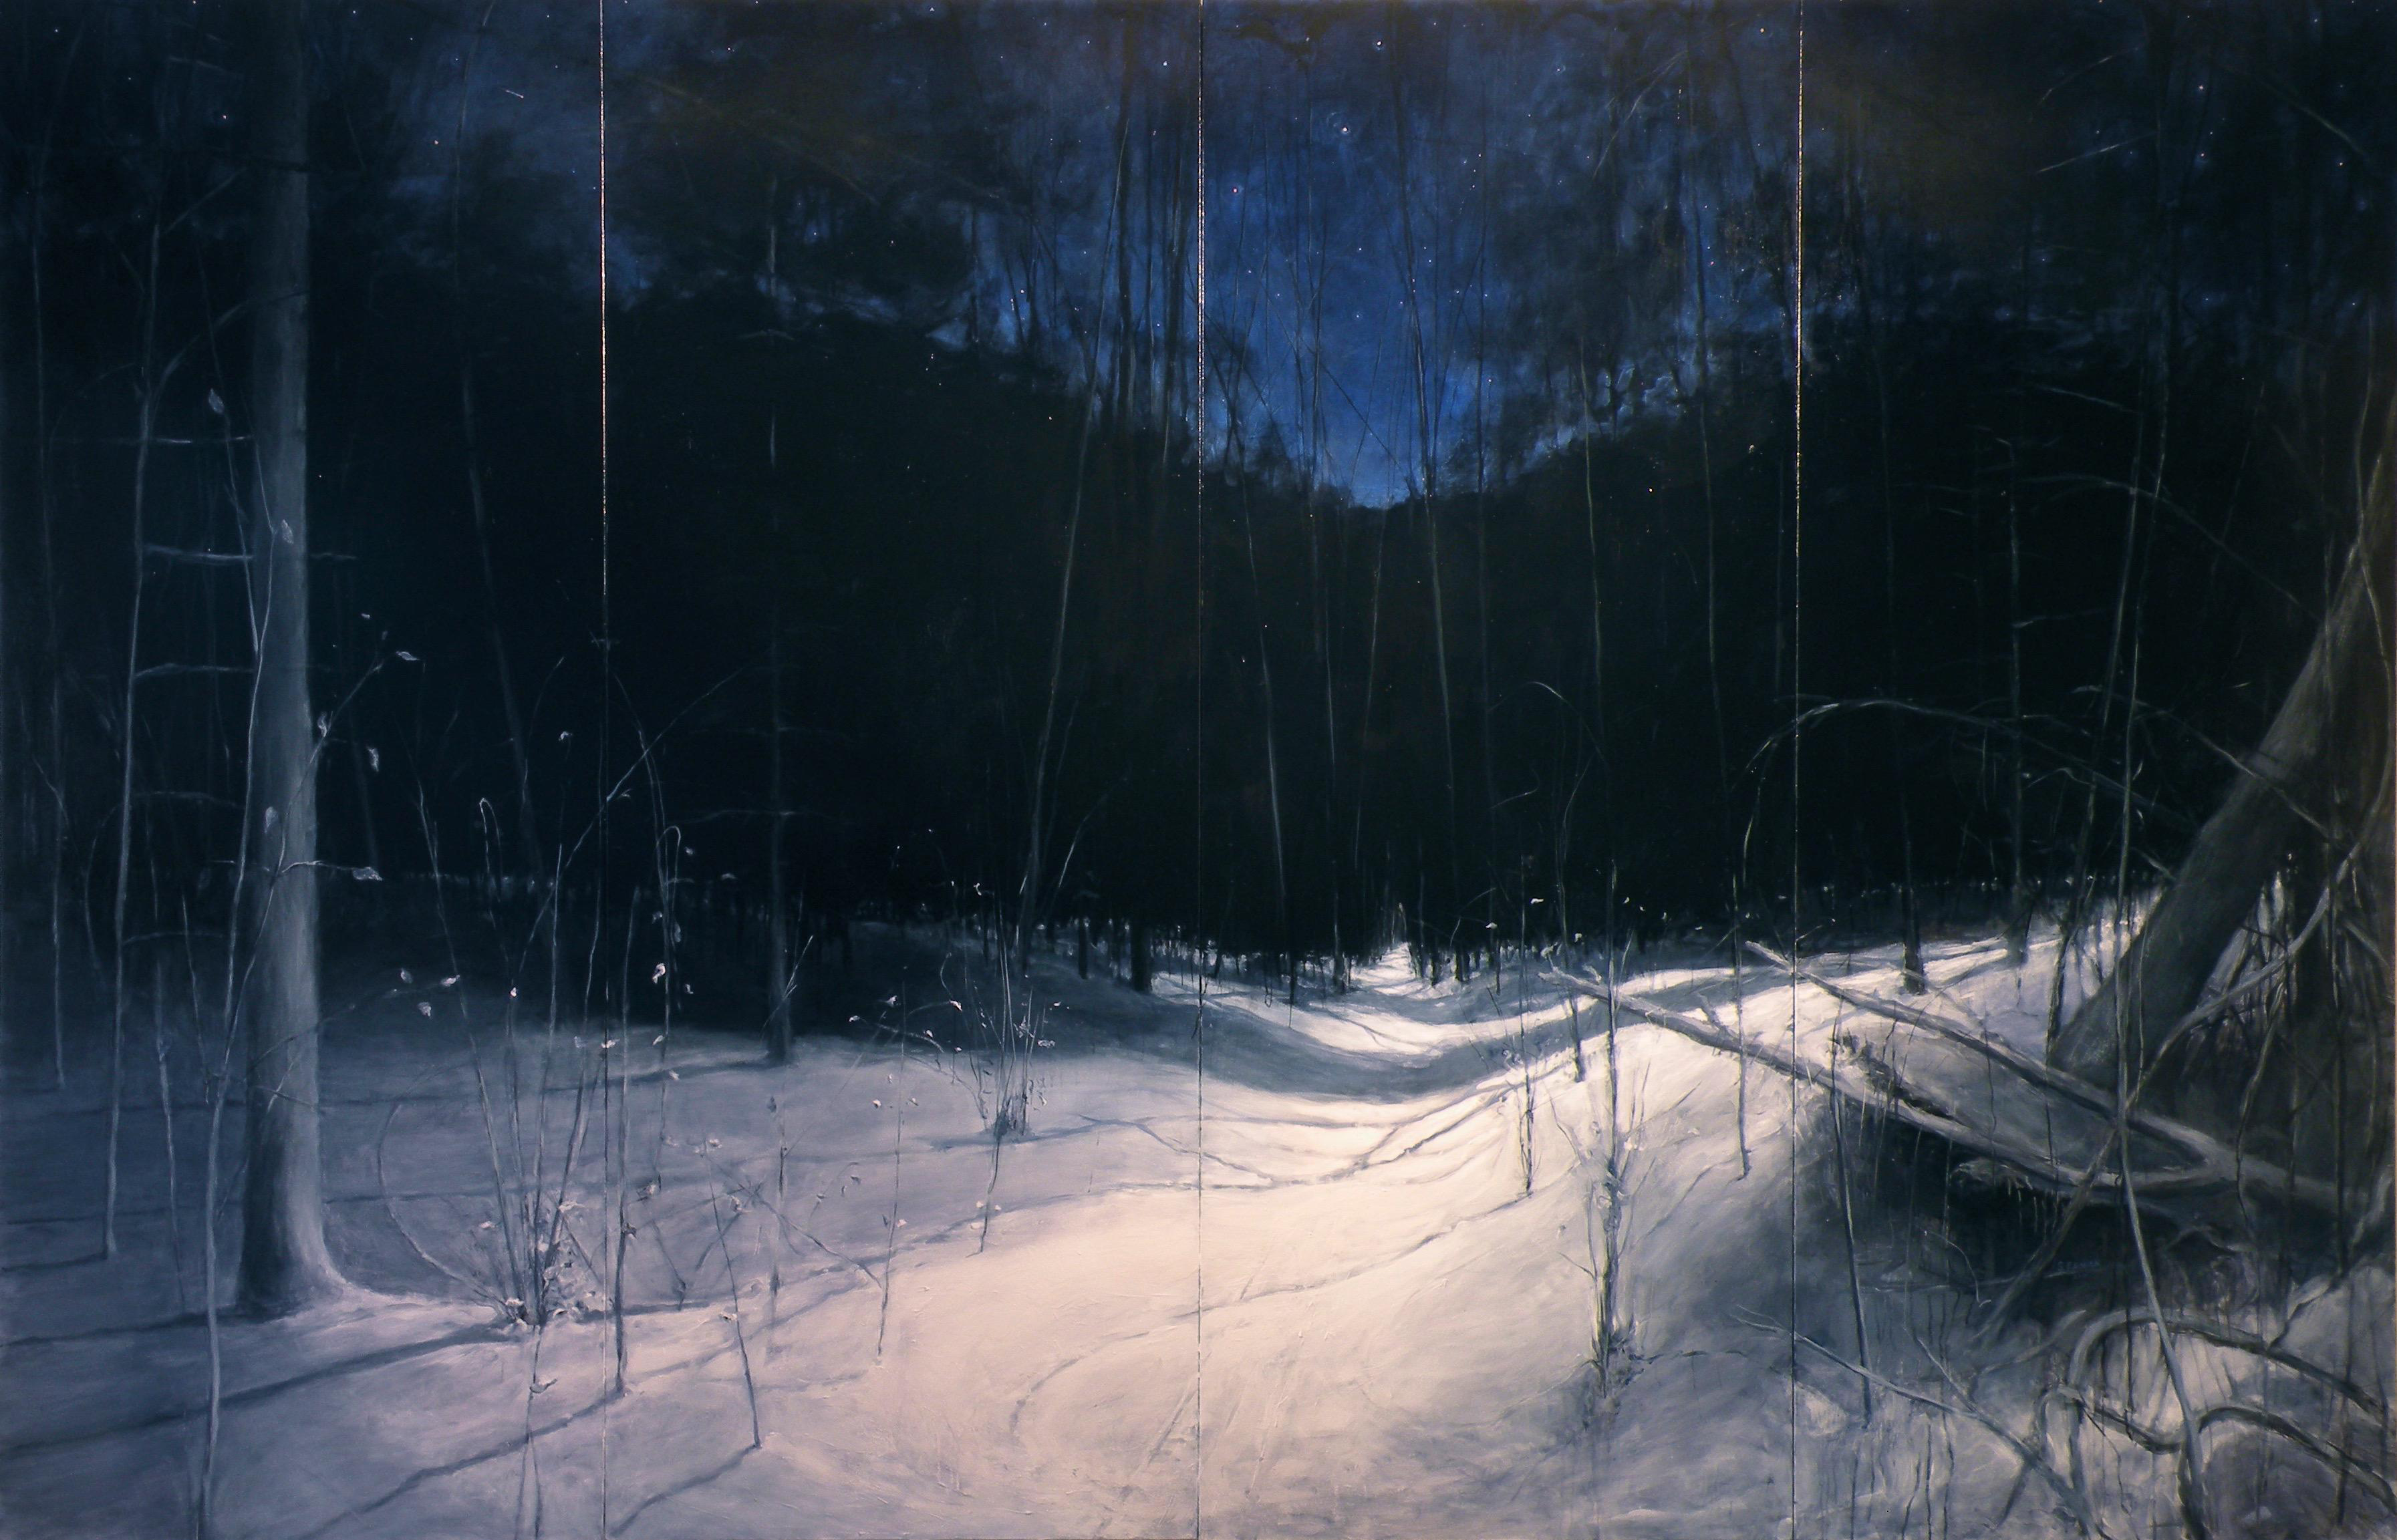 Stephen Remick Acrylic Painting Snow Winter Moonlight Forest 3587x2305